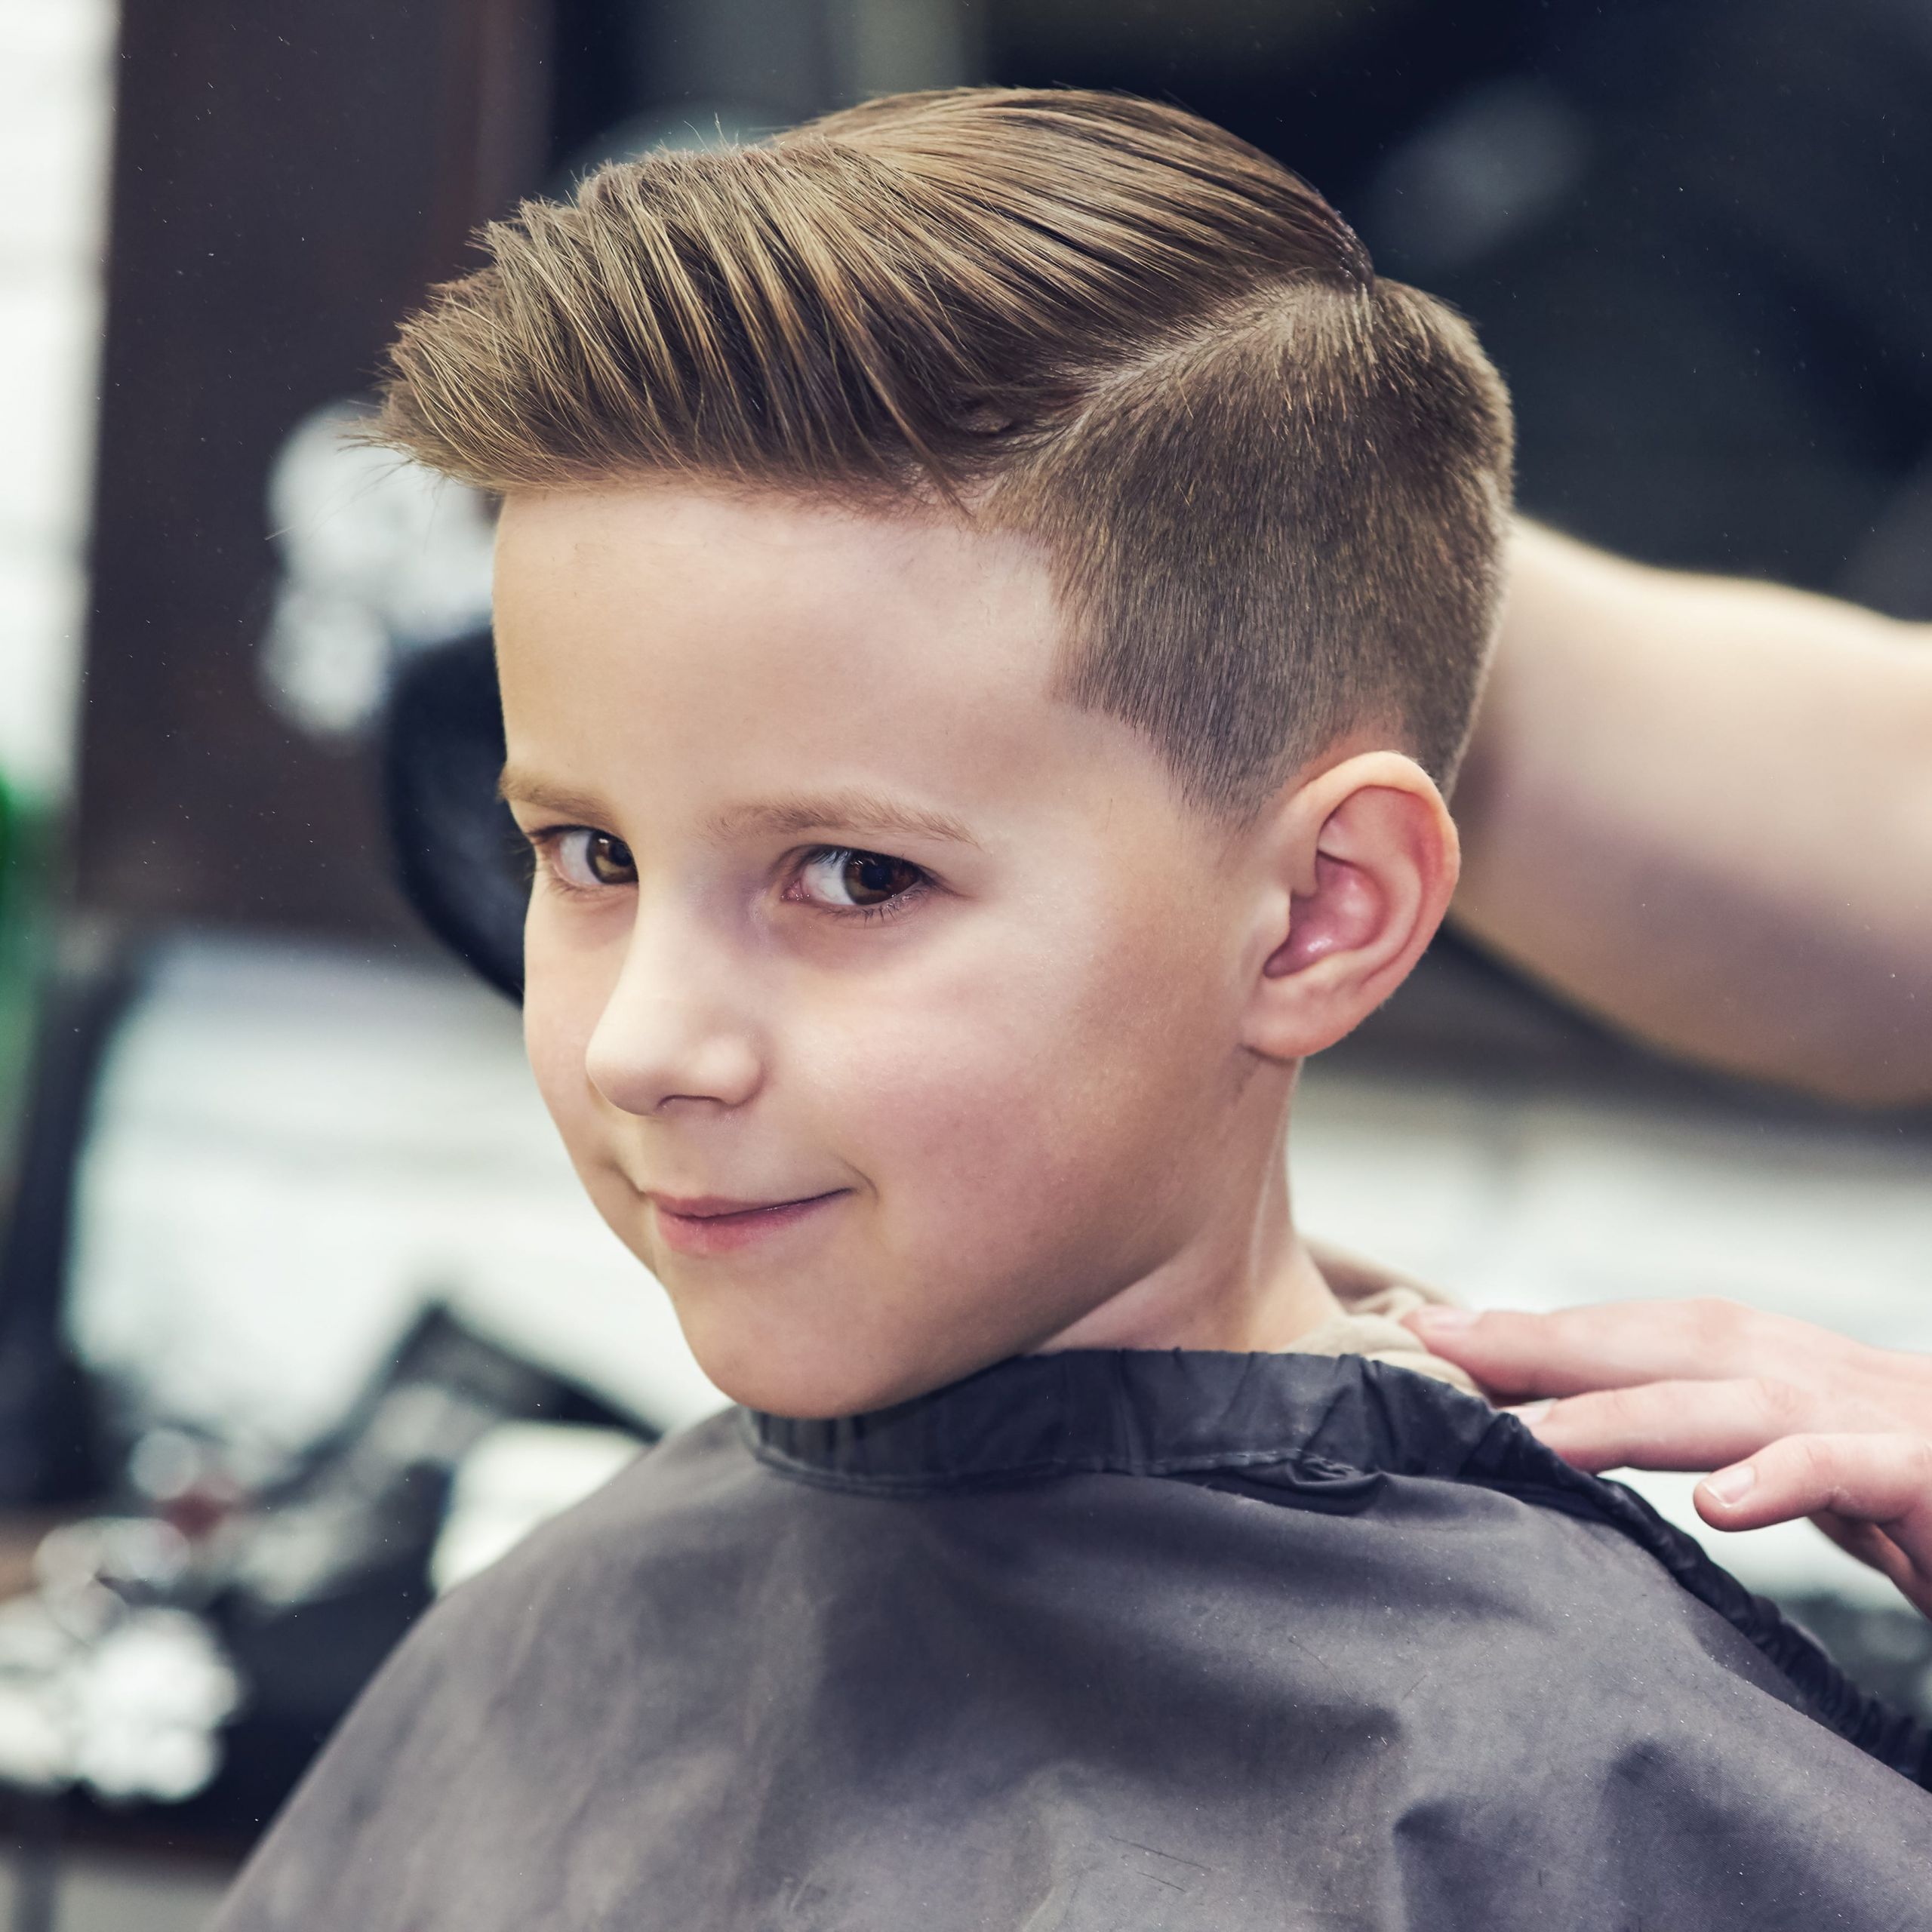 Kids Hair Cut Styles
 40 Excellent School Haircuts for Boys Styling Tips